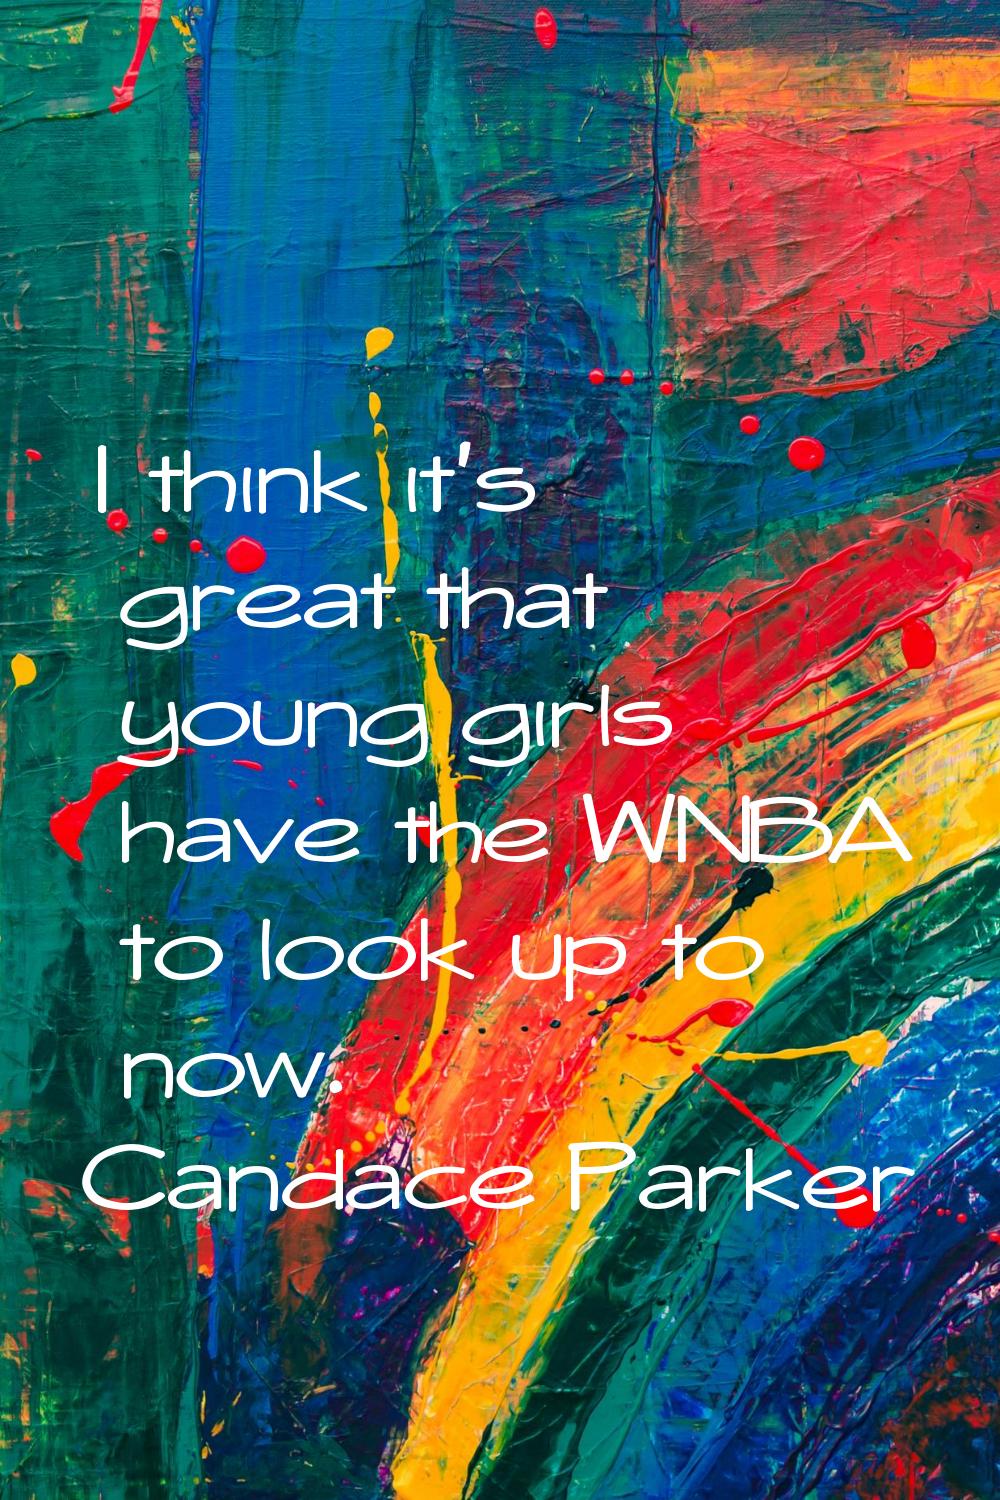 I think it's great that young girls have the WNBA to look up to now.